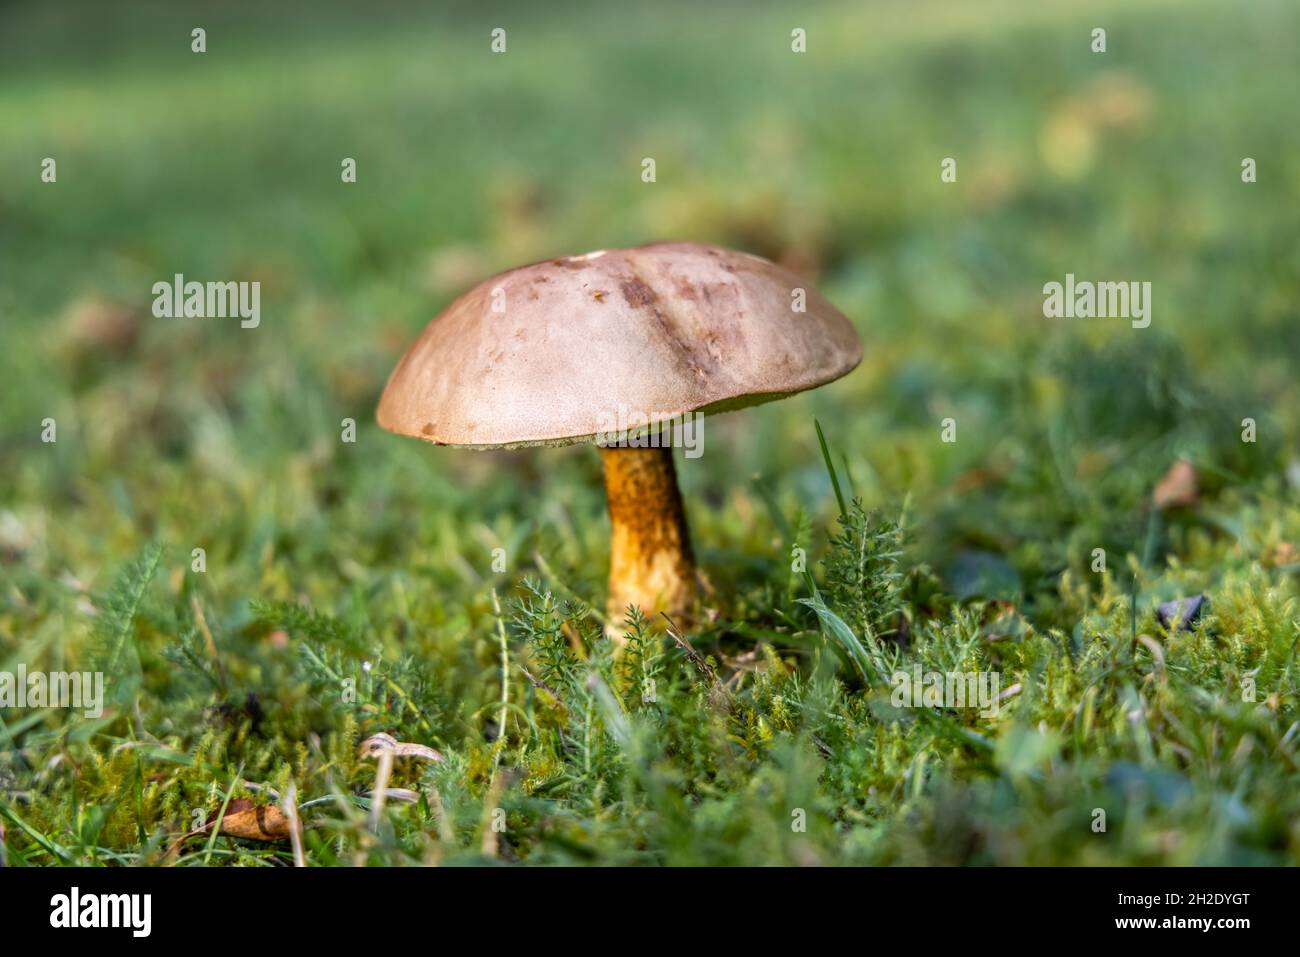 A large brown toadstool fruiting body growing in grass in autumn in a garden in Surrey, south-east England Stock Photo